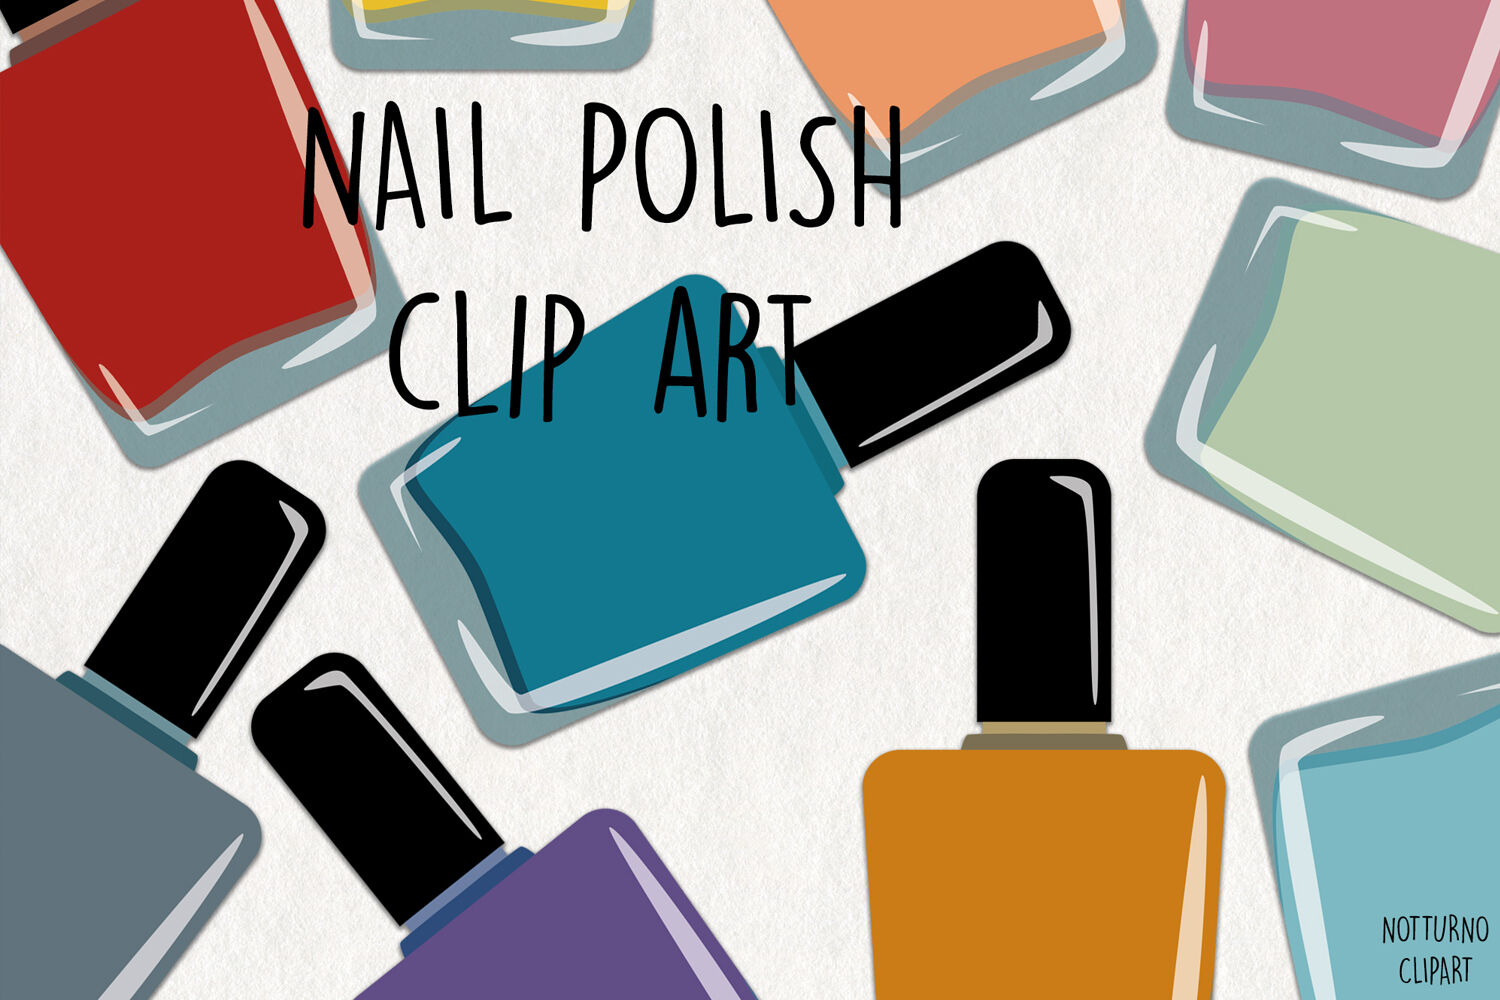 2. Free Nail Polish Clipart in AI, SVG, EPS or PSD - wide 1